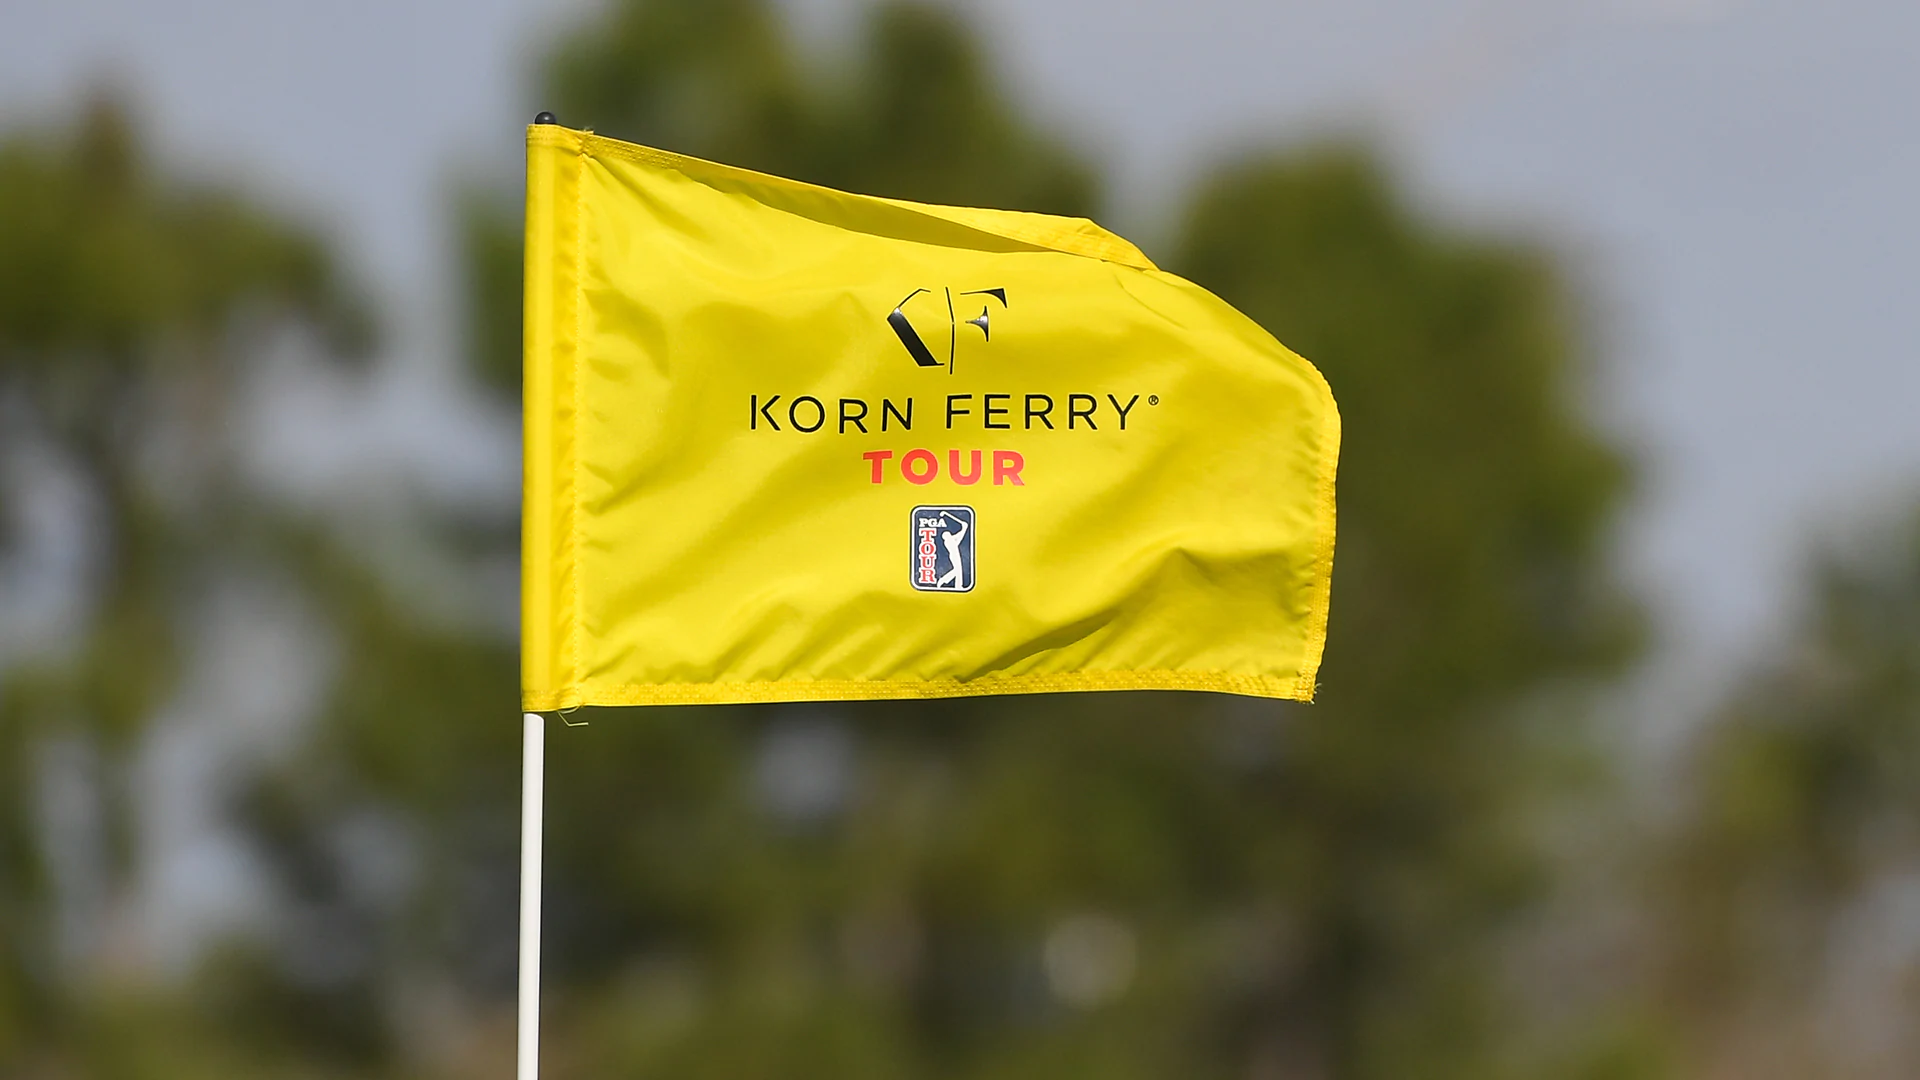 Korn Ferry Tour plans for $1 million purses in each event by start of 2023 season